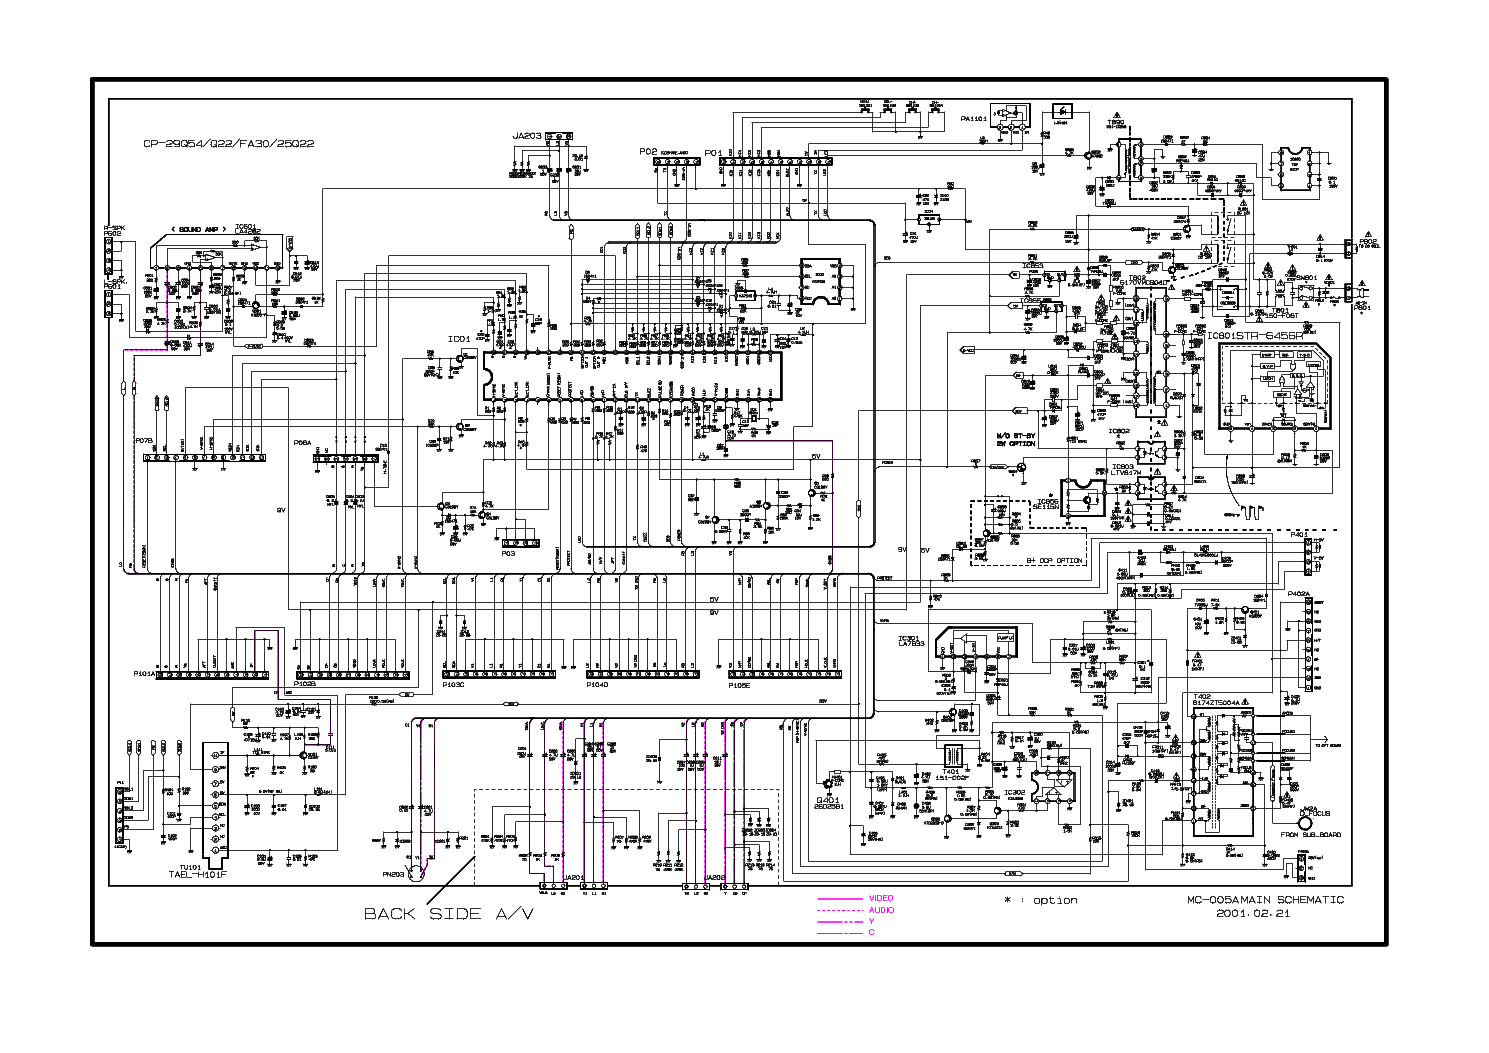 LG CP-25Q22 service manual (1st page)